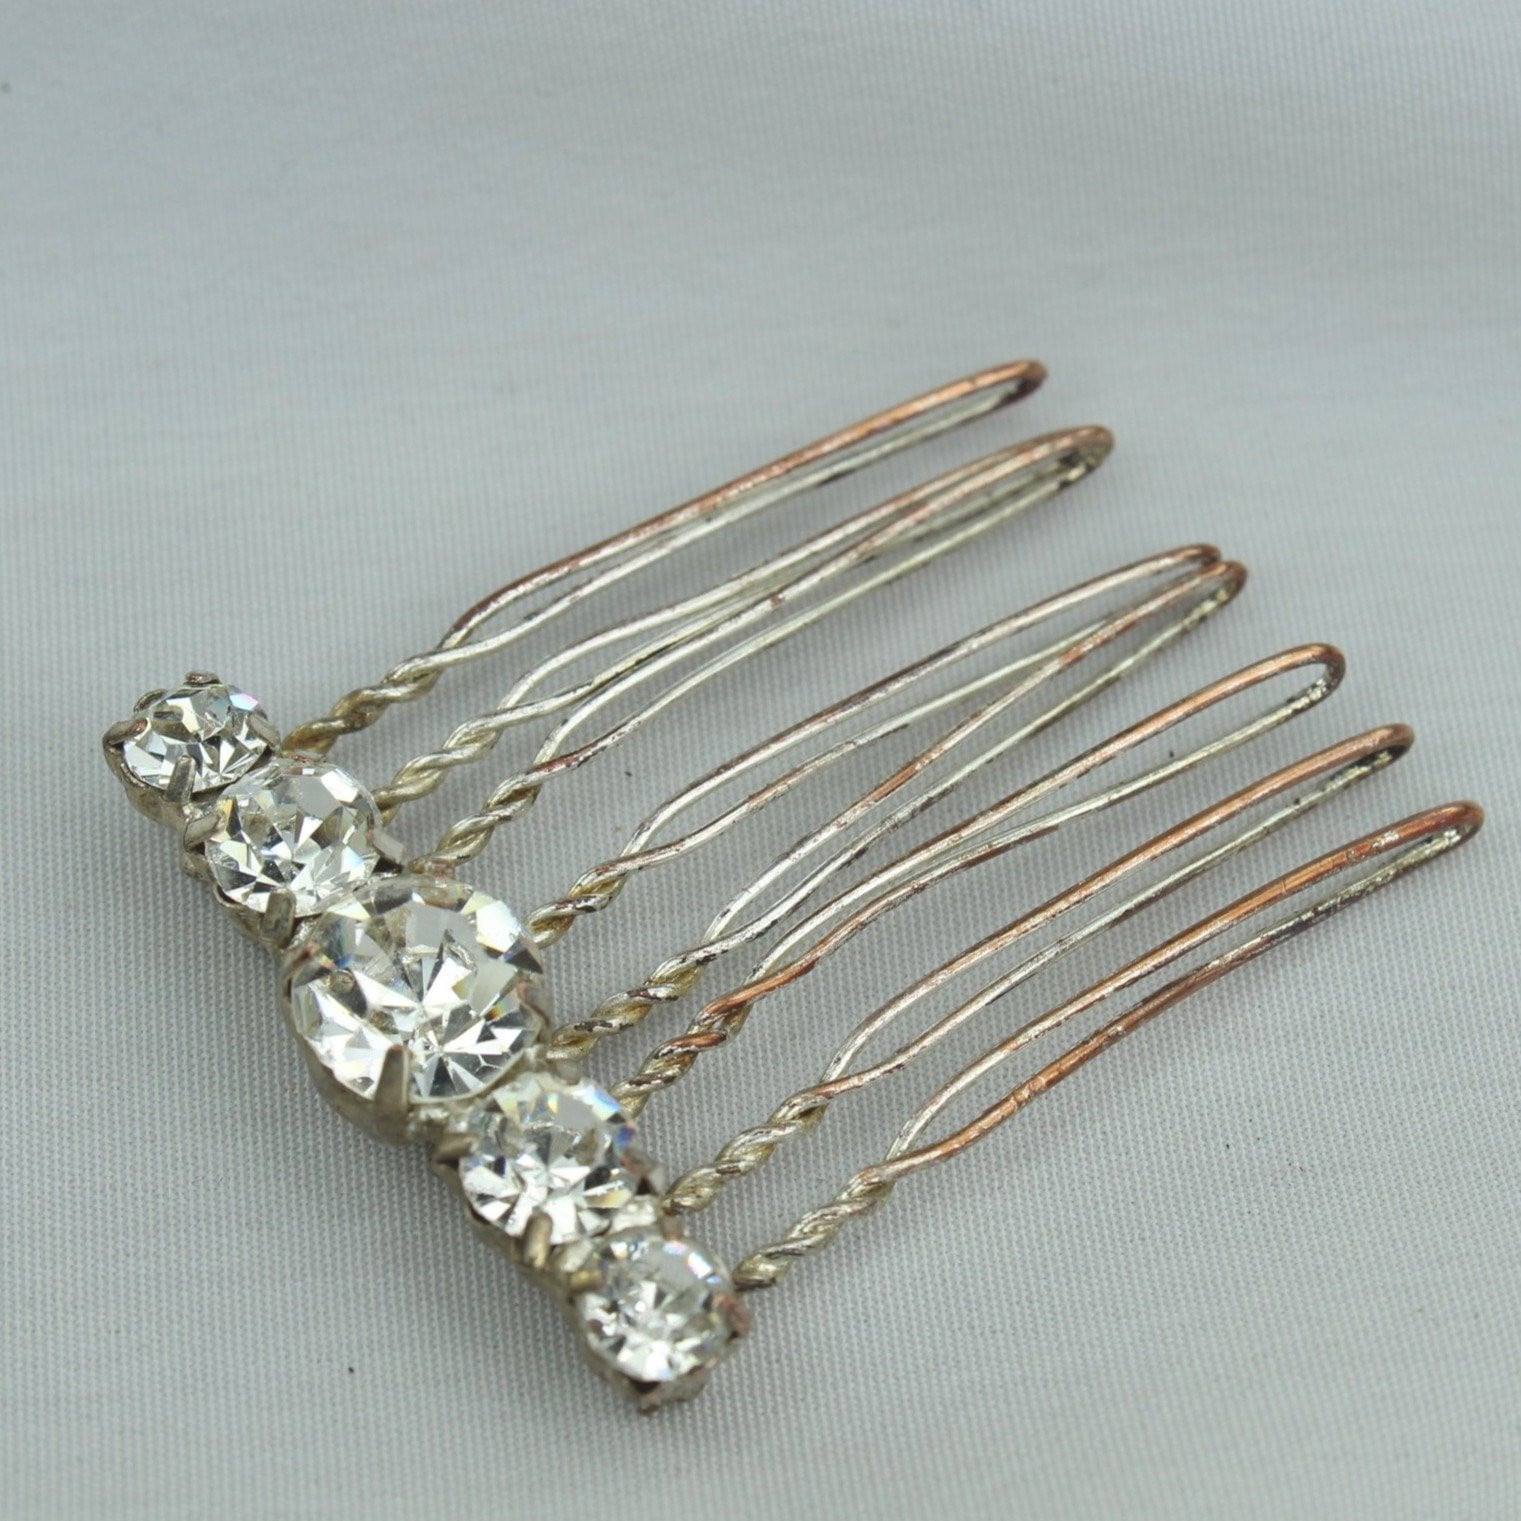 Neat Vintage Antique Hair Pin Decoration. Metal hair pin like base with large shiny Rhinestones. Metal shows vintage Stones great!  Fun piece. 